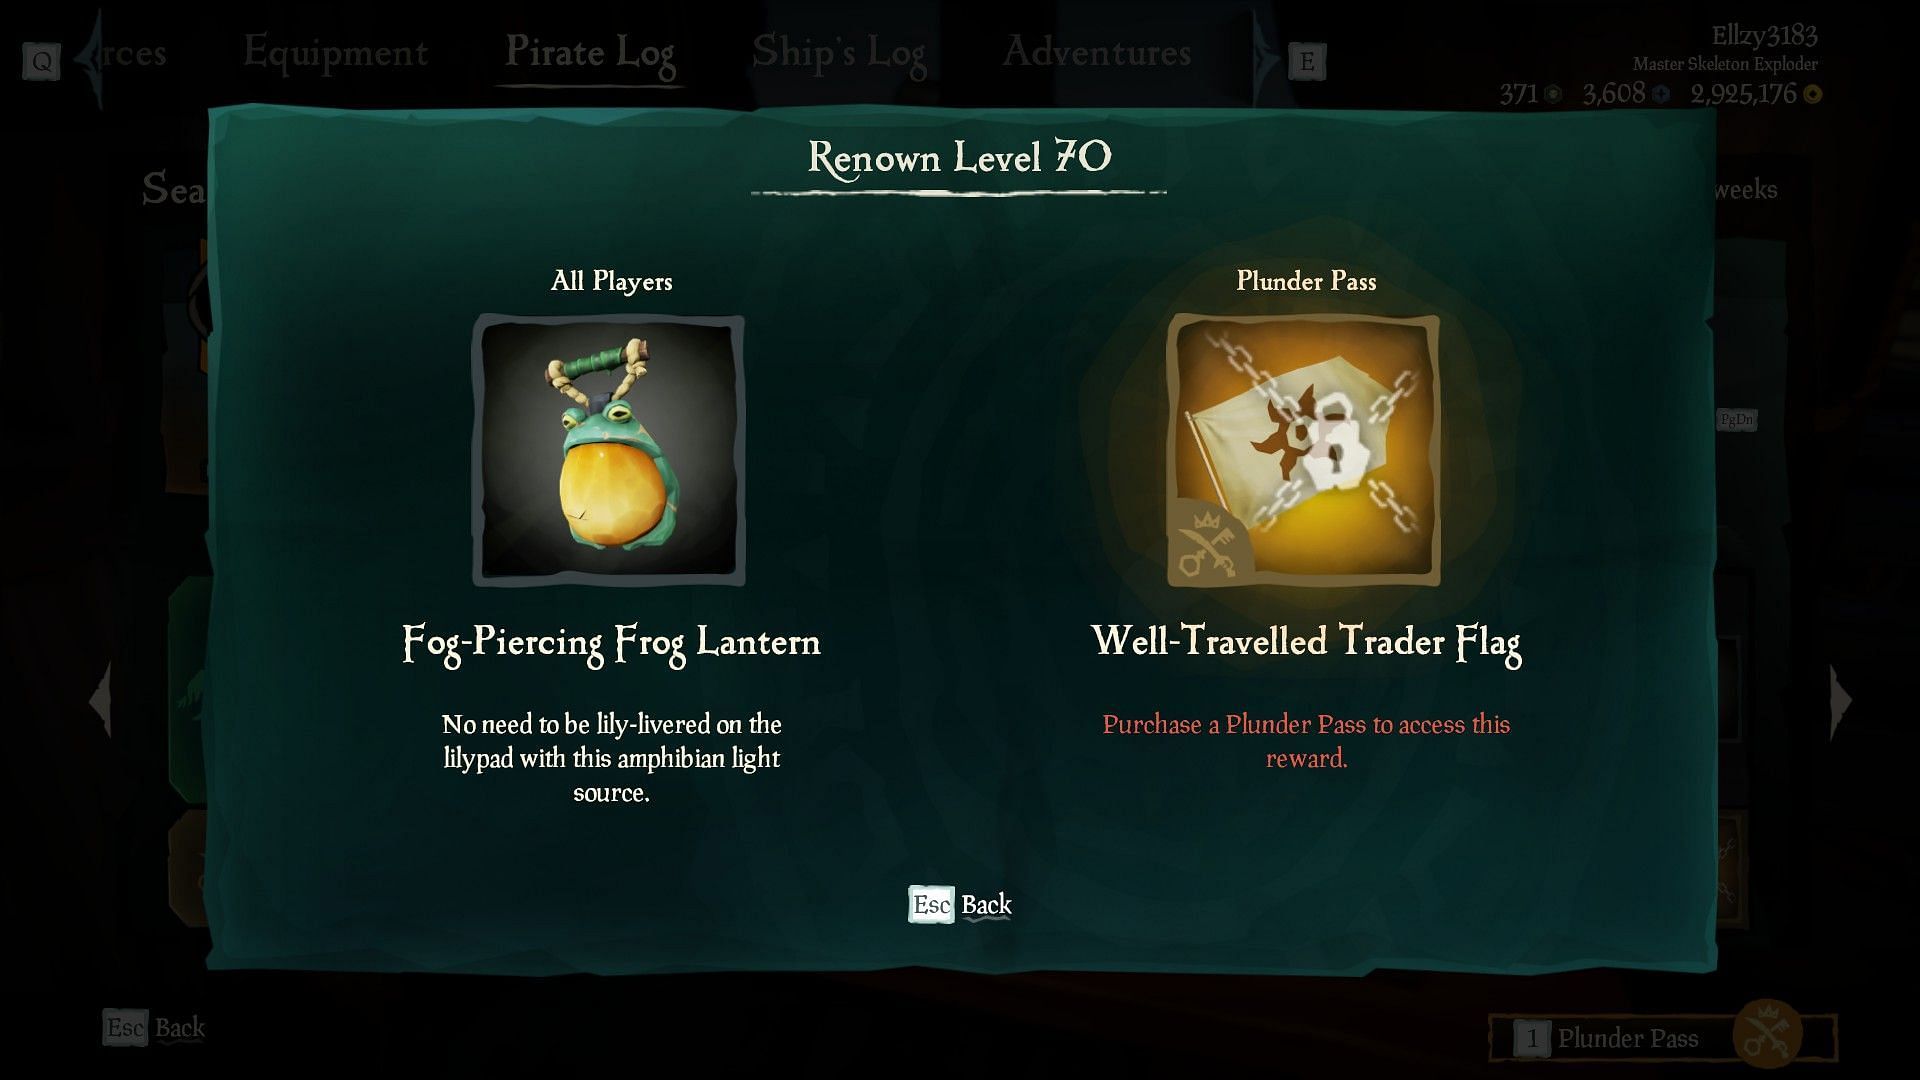 The Frog Lantern is available at level 70 as a free reward. (Image via Rare)